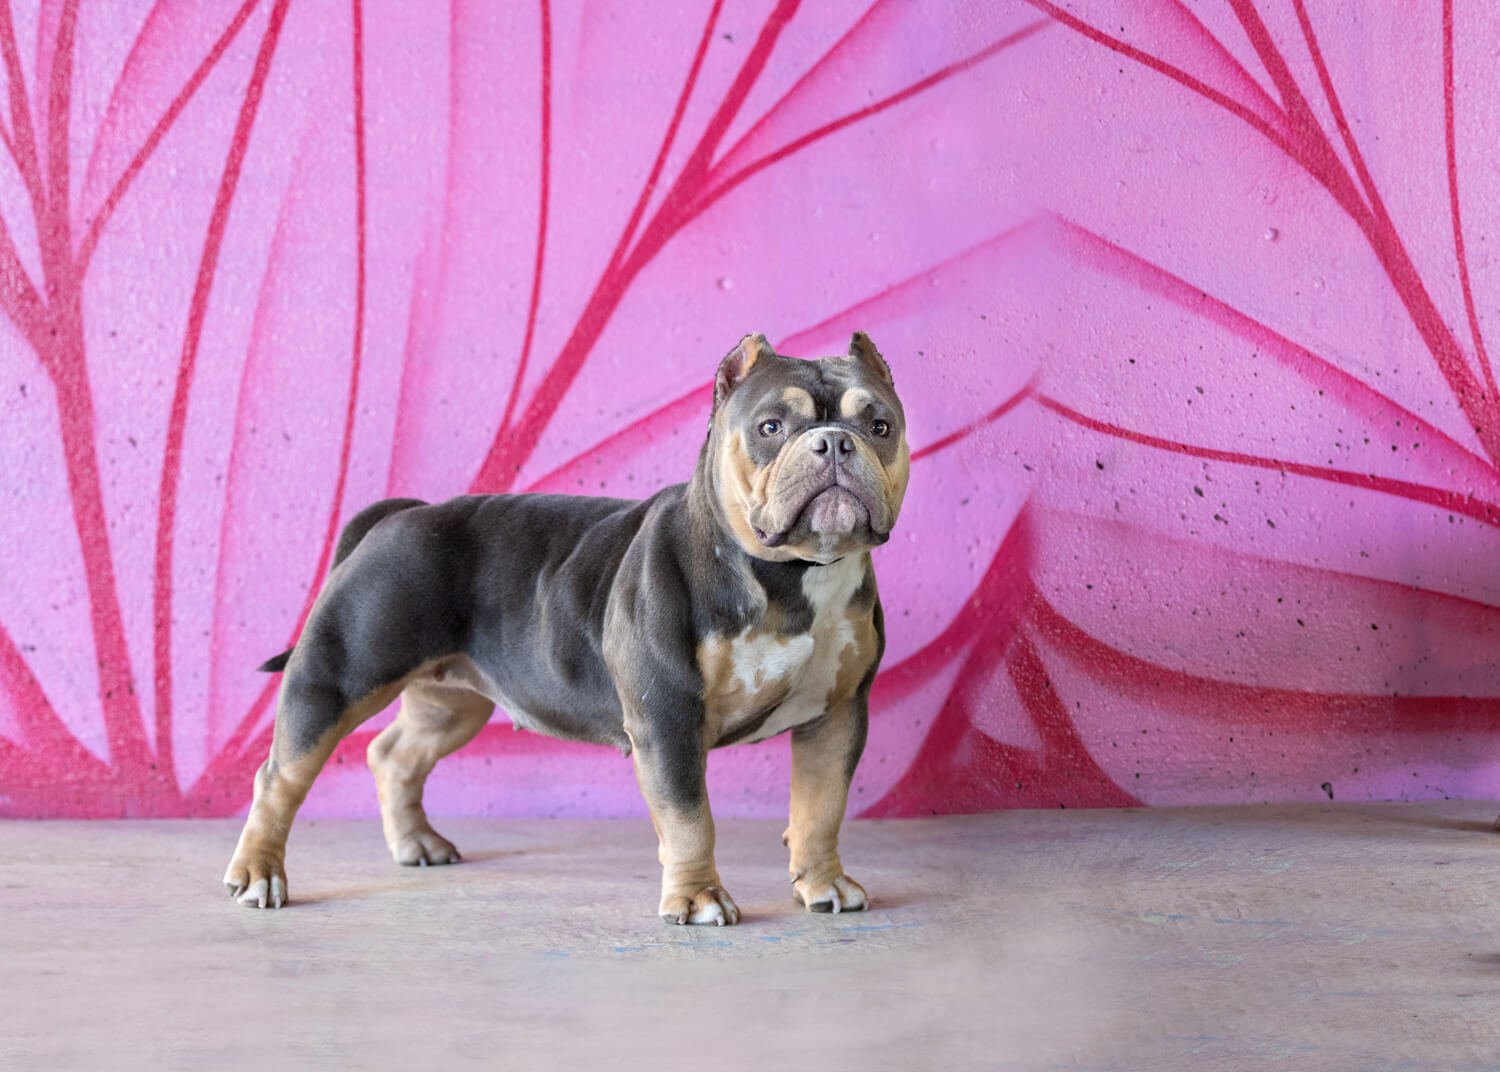 We chose pink graffiti for this little Bully girl's portrait